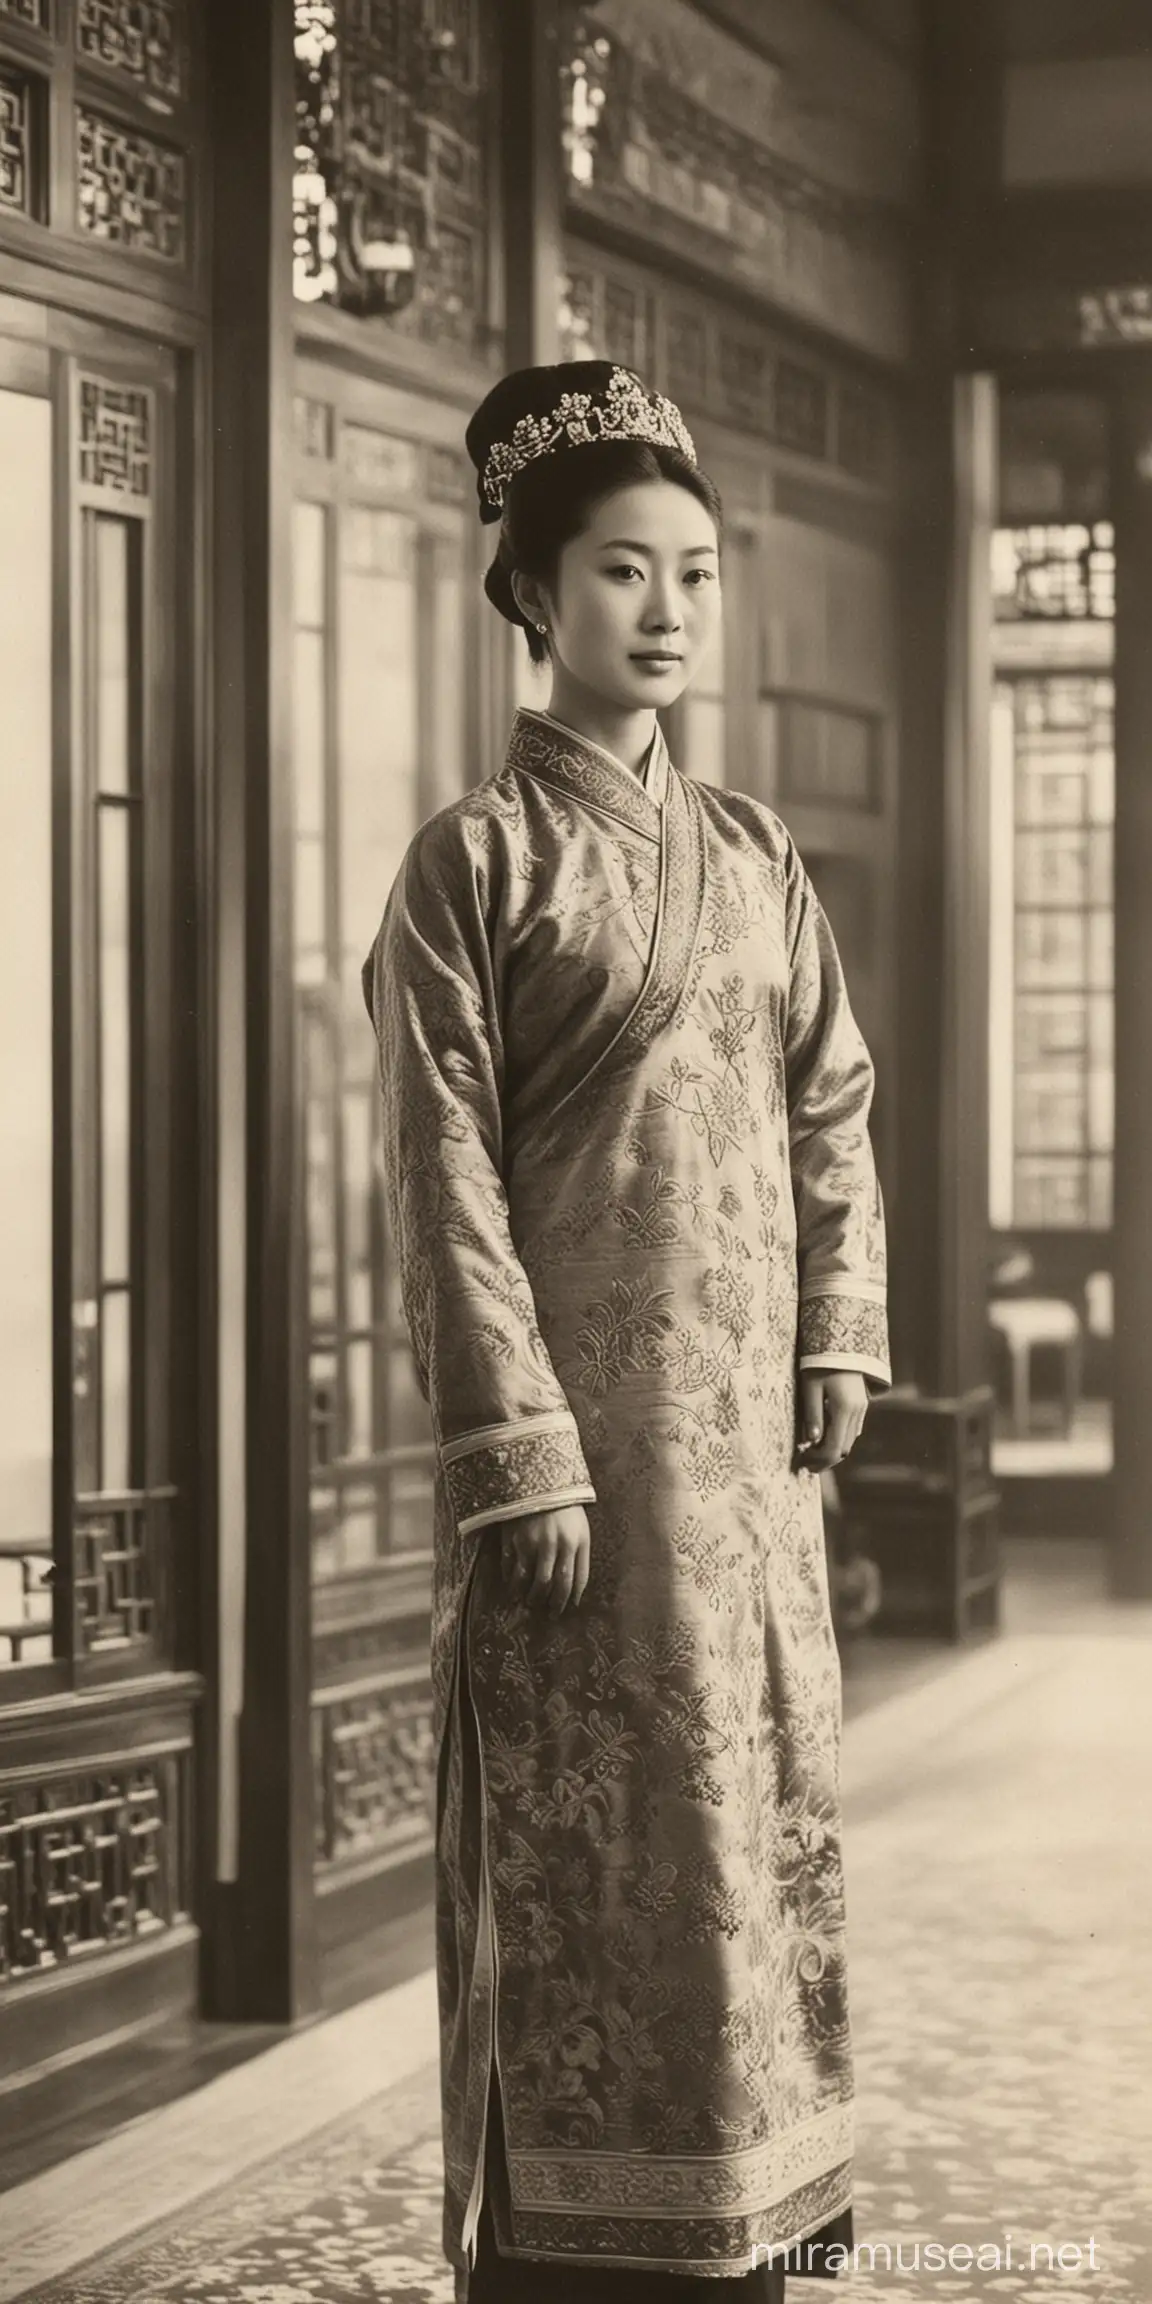 Chinese Wealthy Woman in Elegant Villa Setting